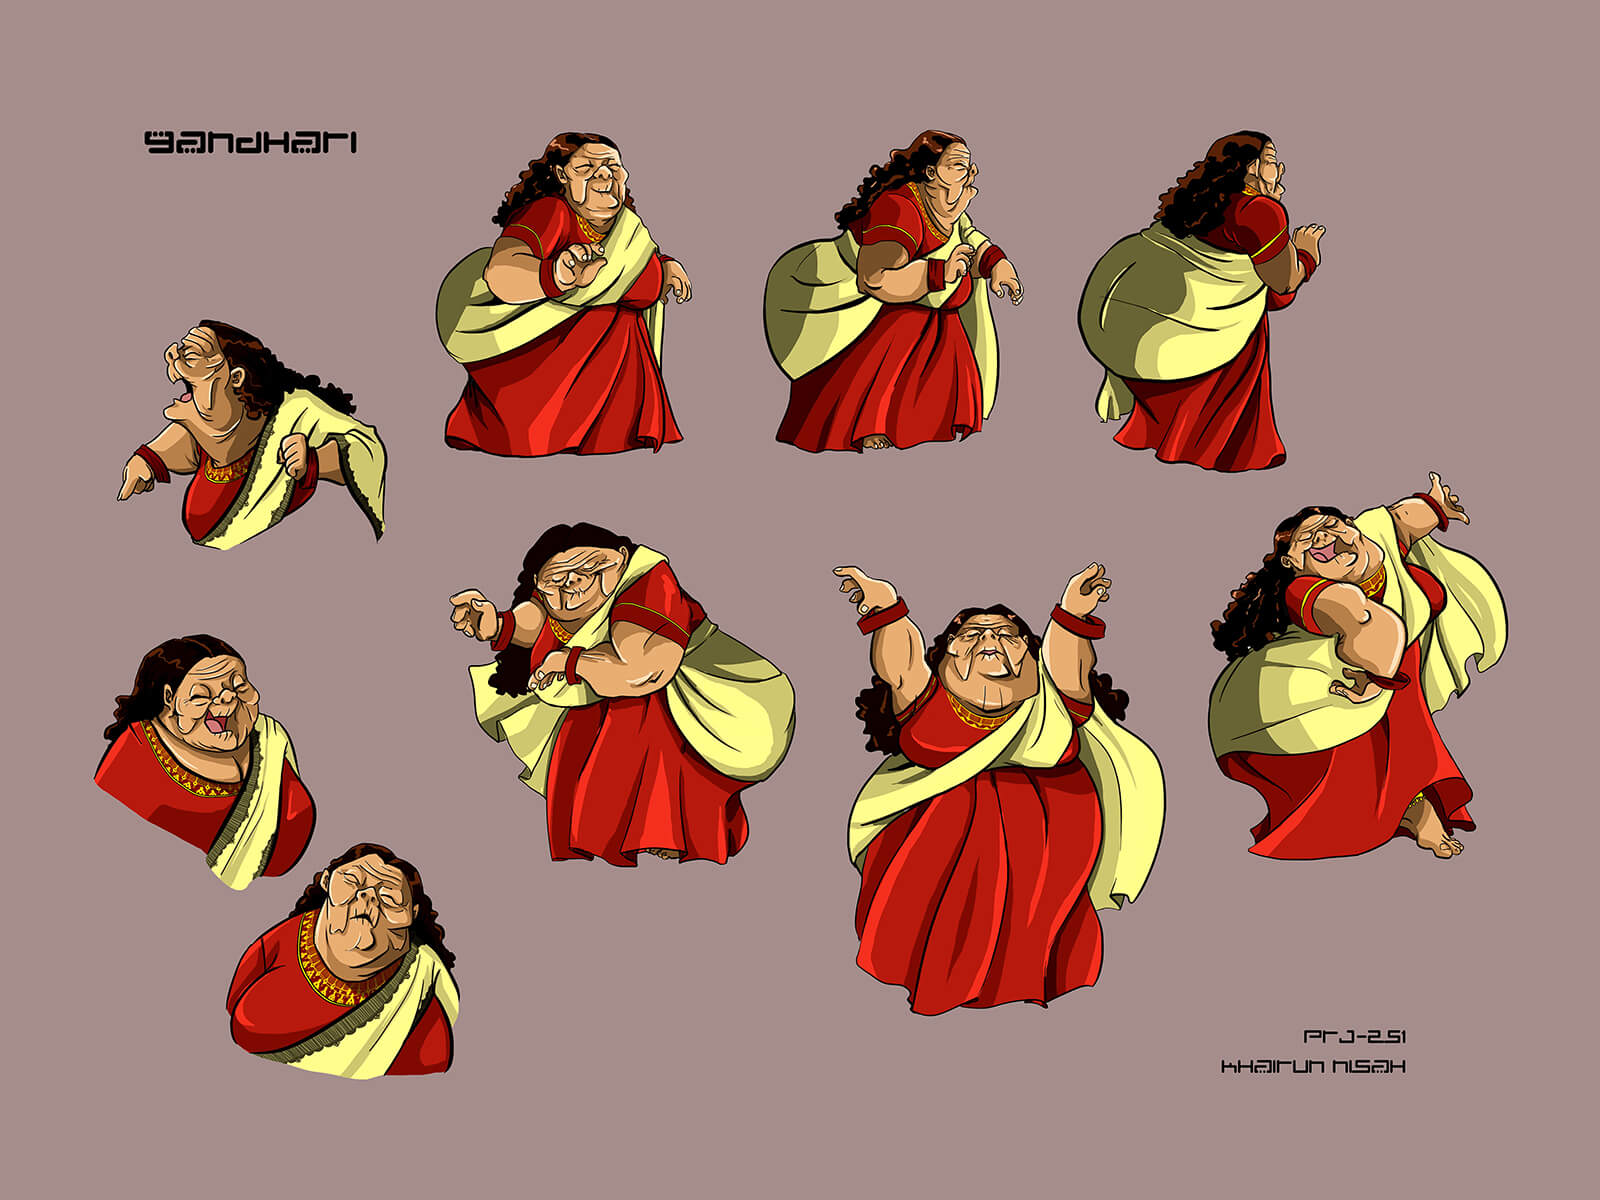 Character sketches of an old, wrinkled woman in a yellow and red sari-type dress as she dances and delivers various reactions.